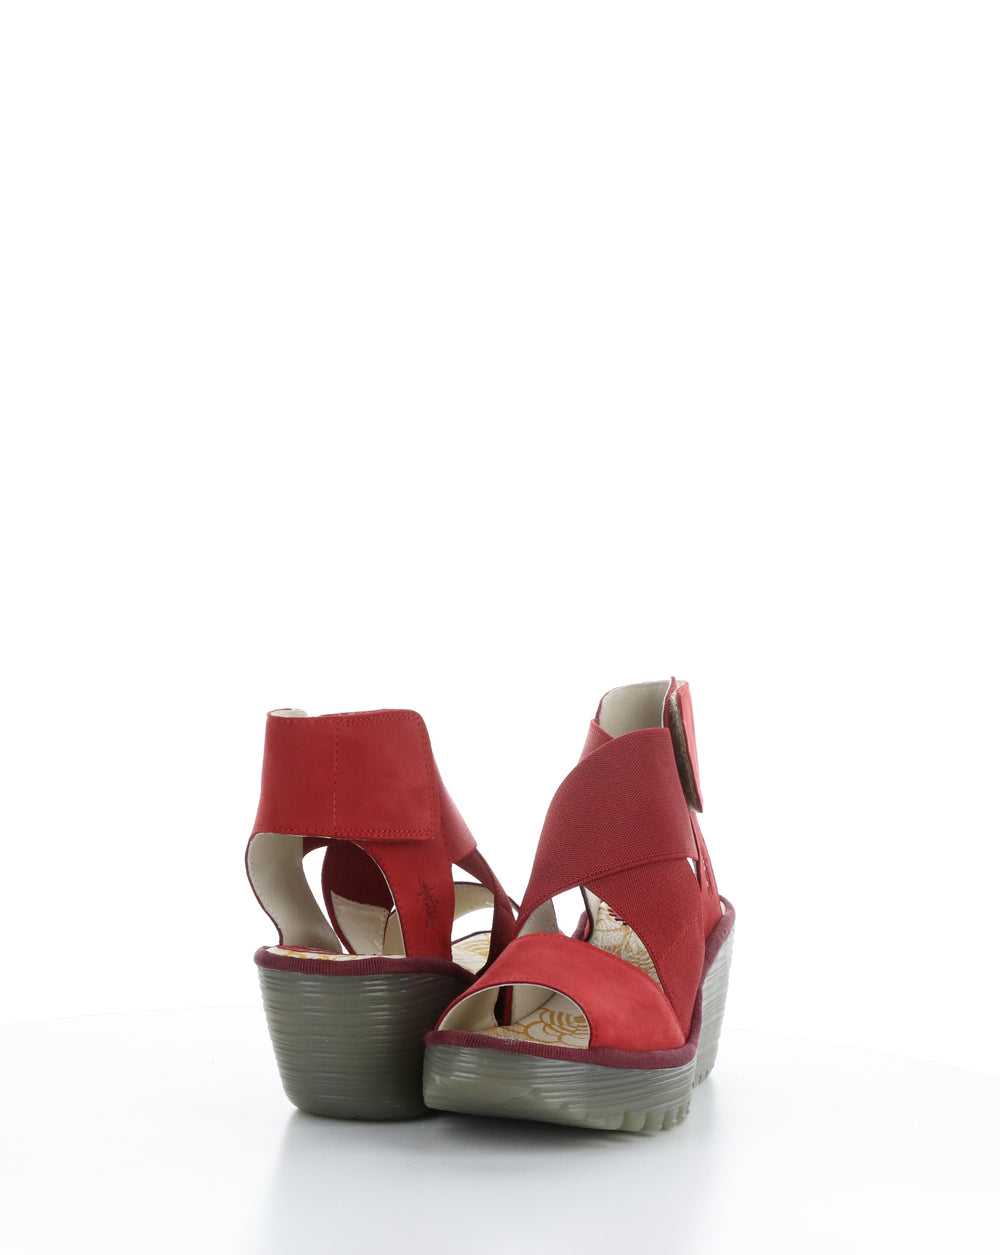 YUBA385FLY 008 LIPSTICK RED Elasticated Sandals